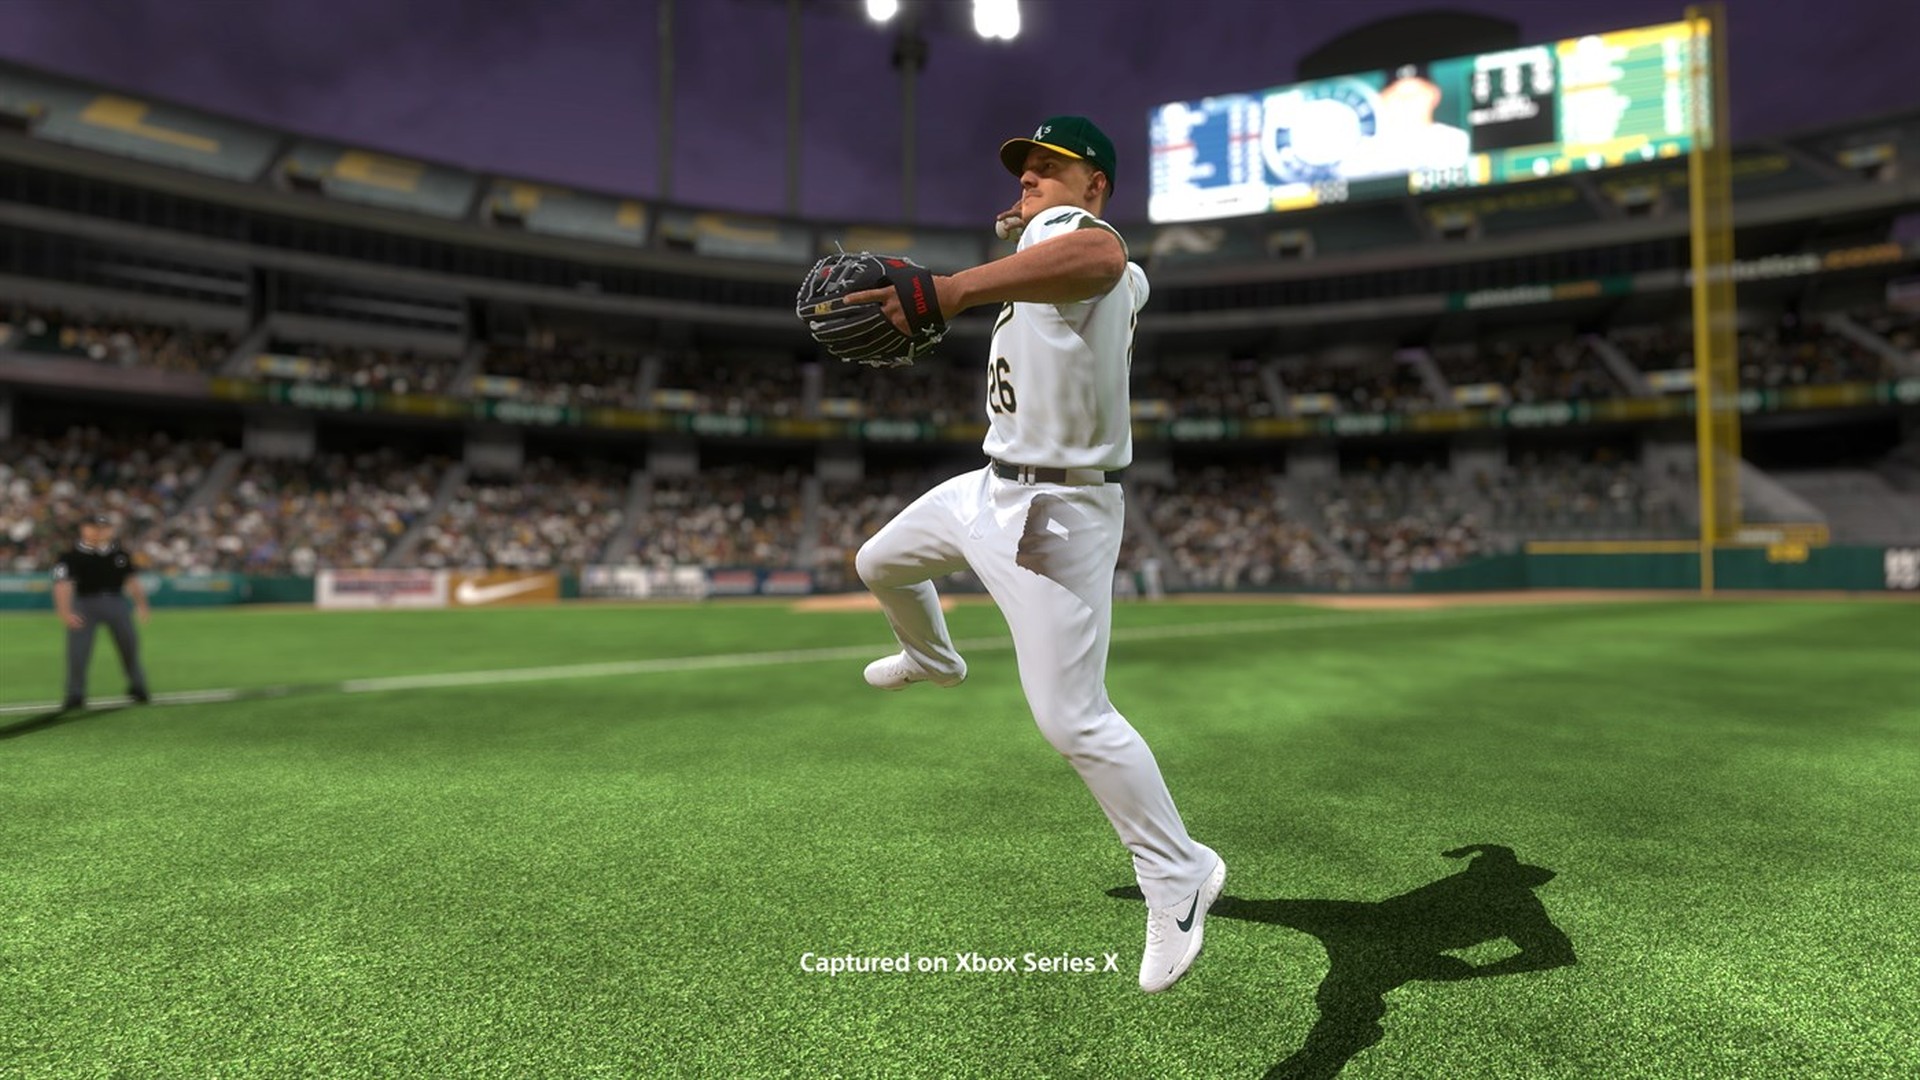 MLB The Show 21 Digital Deluxe Edition – April 16 – Optimized for Xbox Series X|S